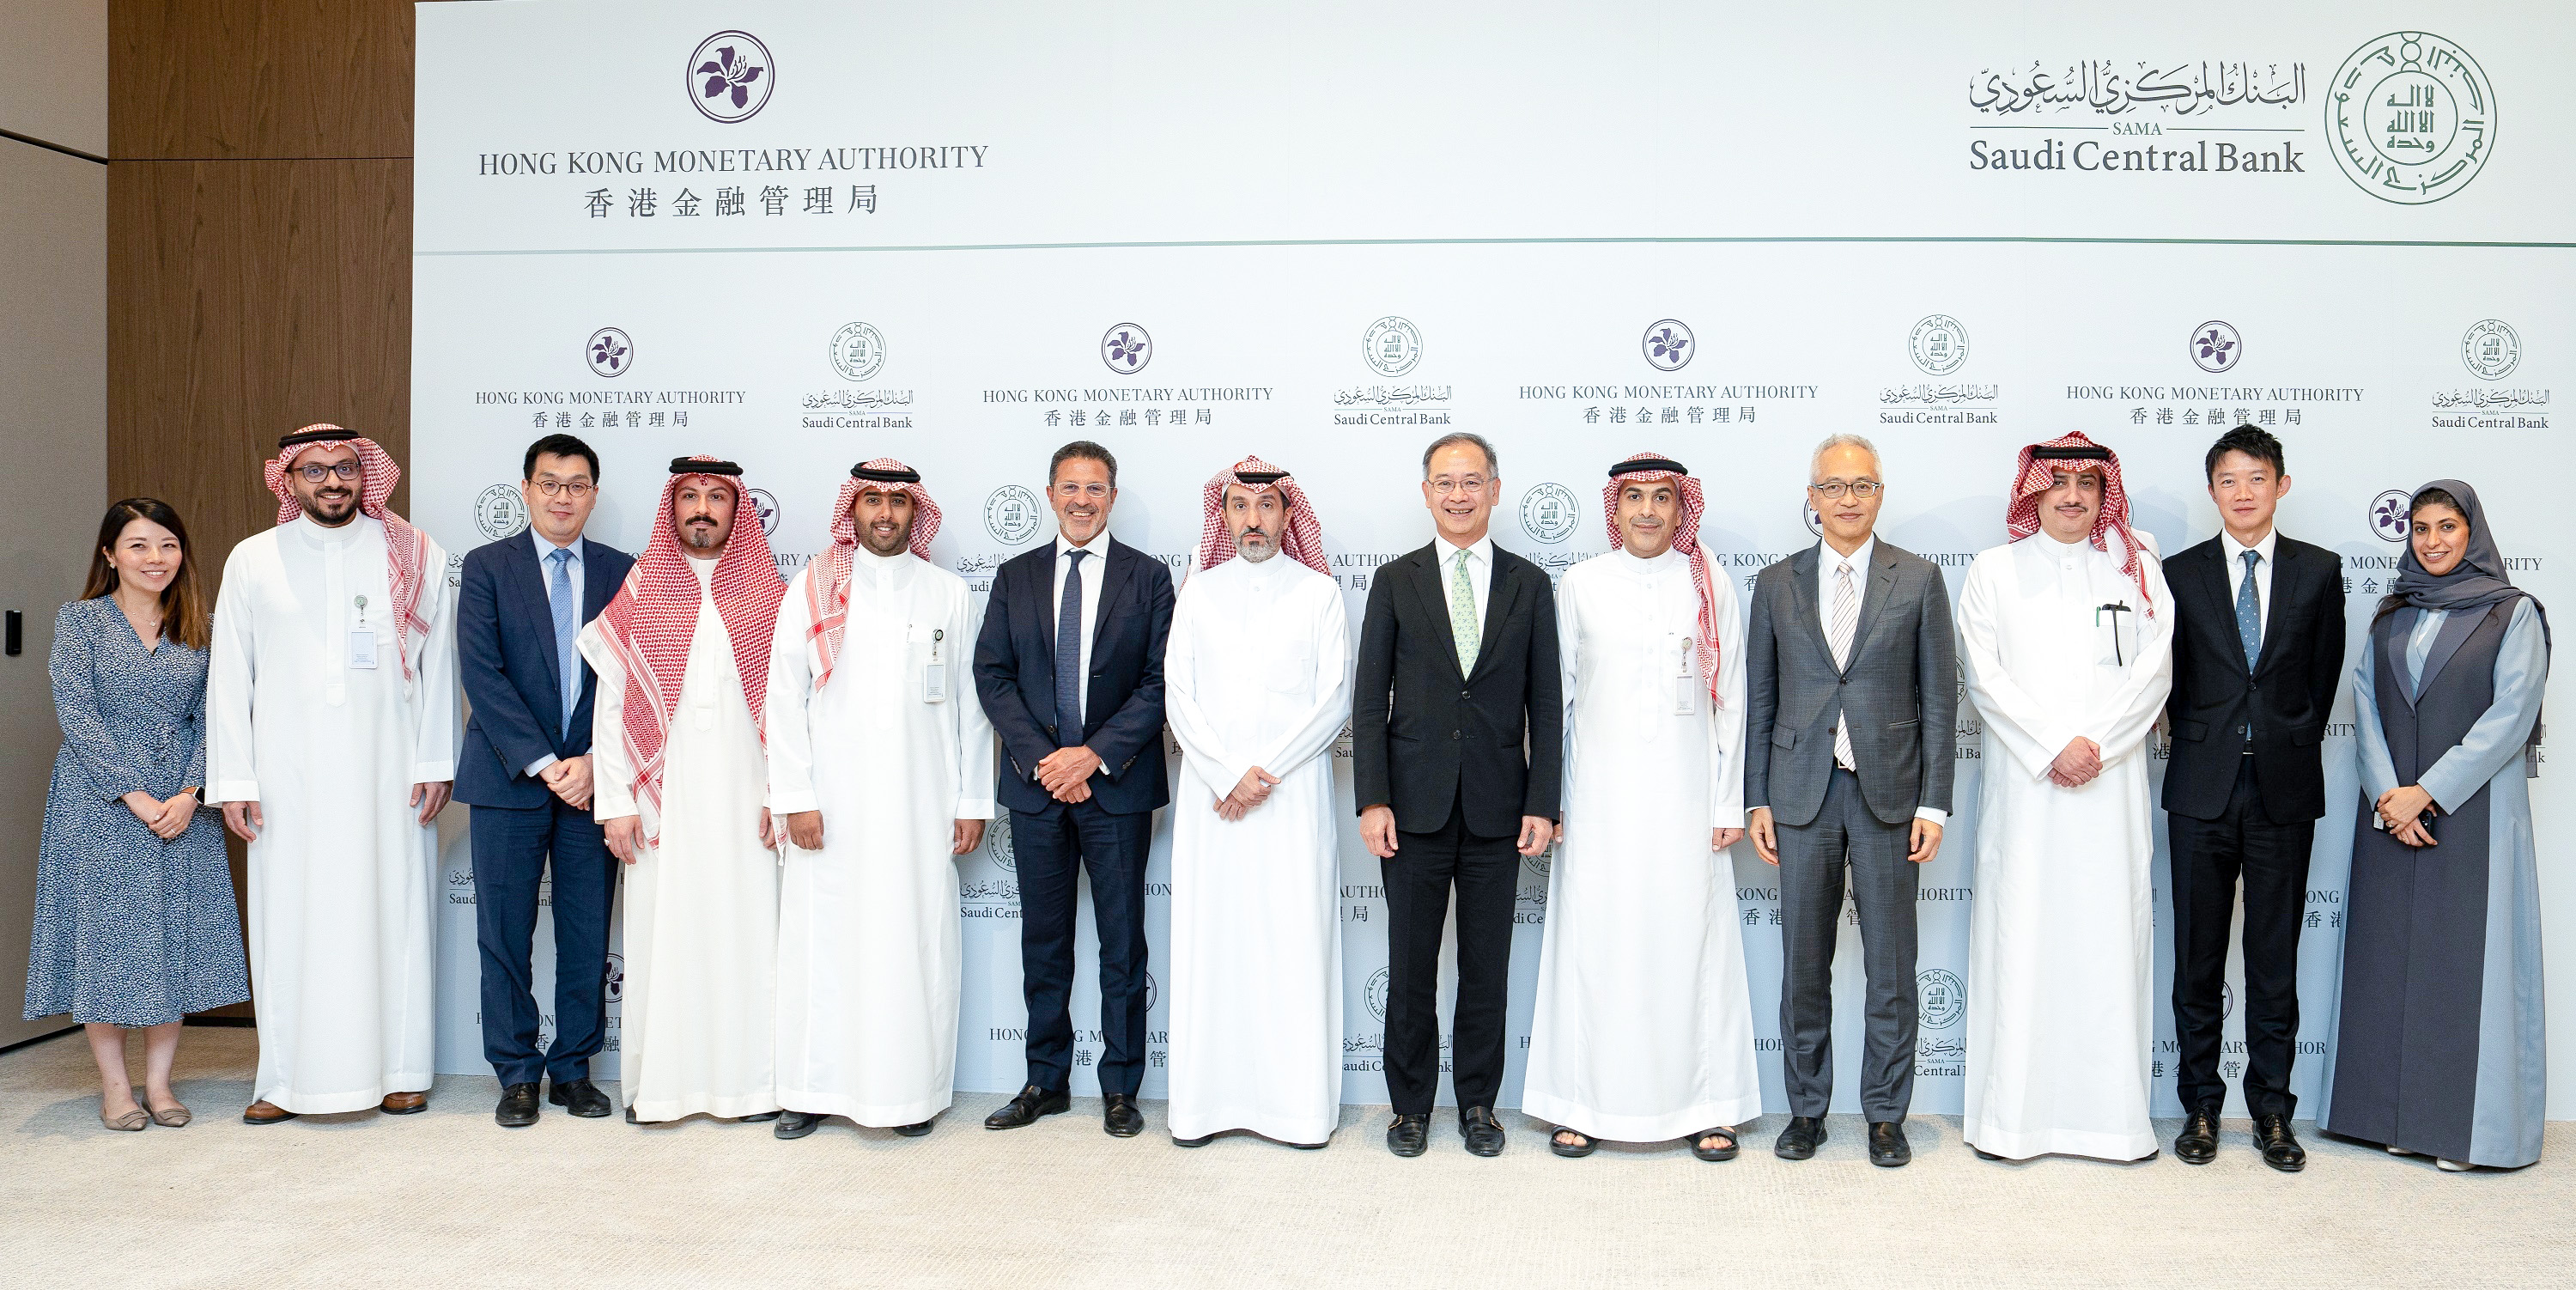 The Chief Executive of the Hong Kong Monetary Authority, Mr Eddie Yue (sixth right) and the Governor of the Saudi Central Bank, Mr Ayman Alsayari (fifth right) conducted a bilateral meeting on 26 July (Riyadh time) with senior managements from HKMA and SAMA to enhance collaboration between the financial services sector in the two jurisdictions.